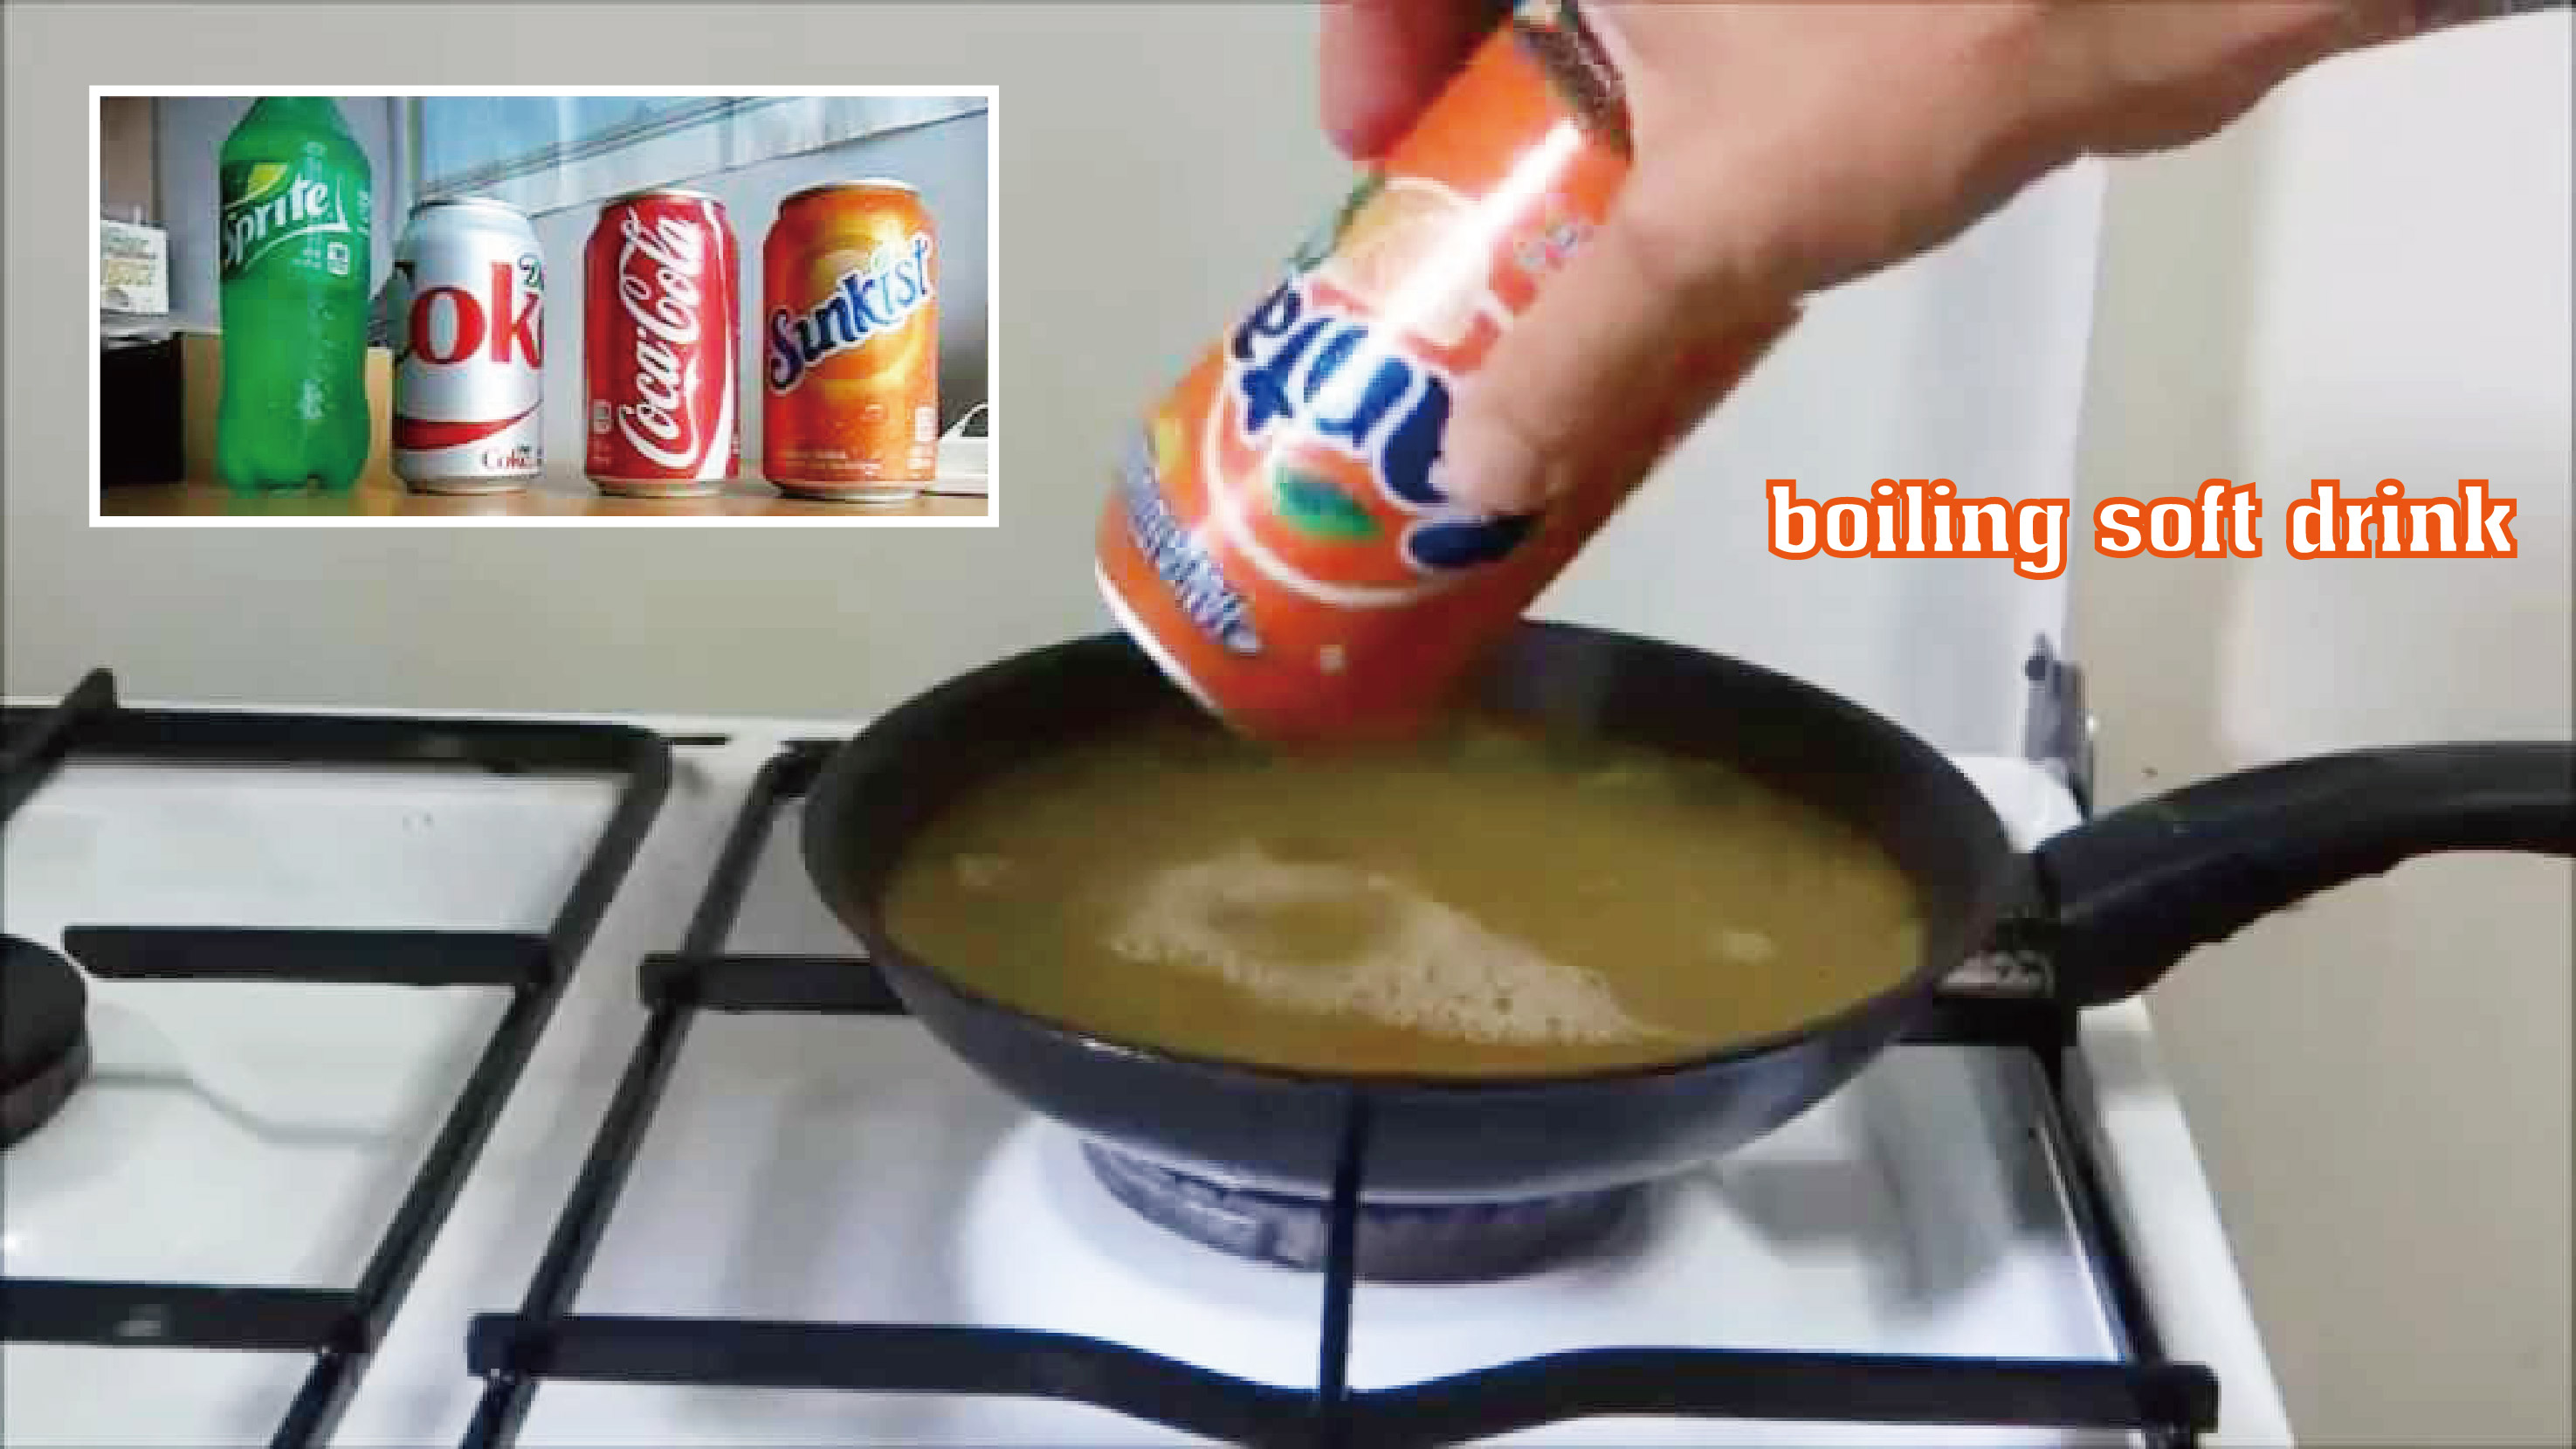 Shocking Experiment - What happens when you boil Soft Drink